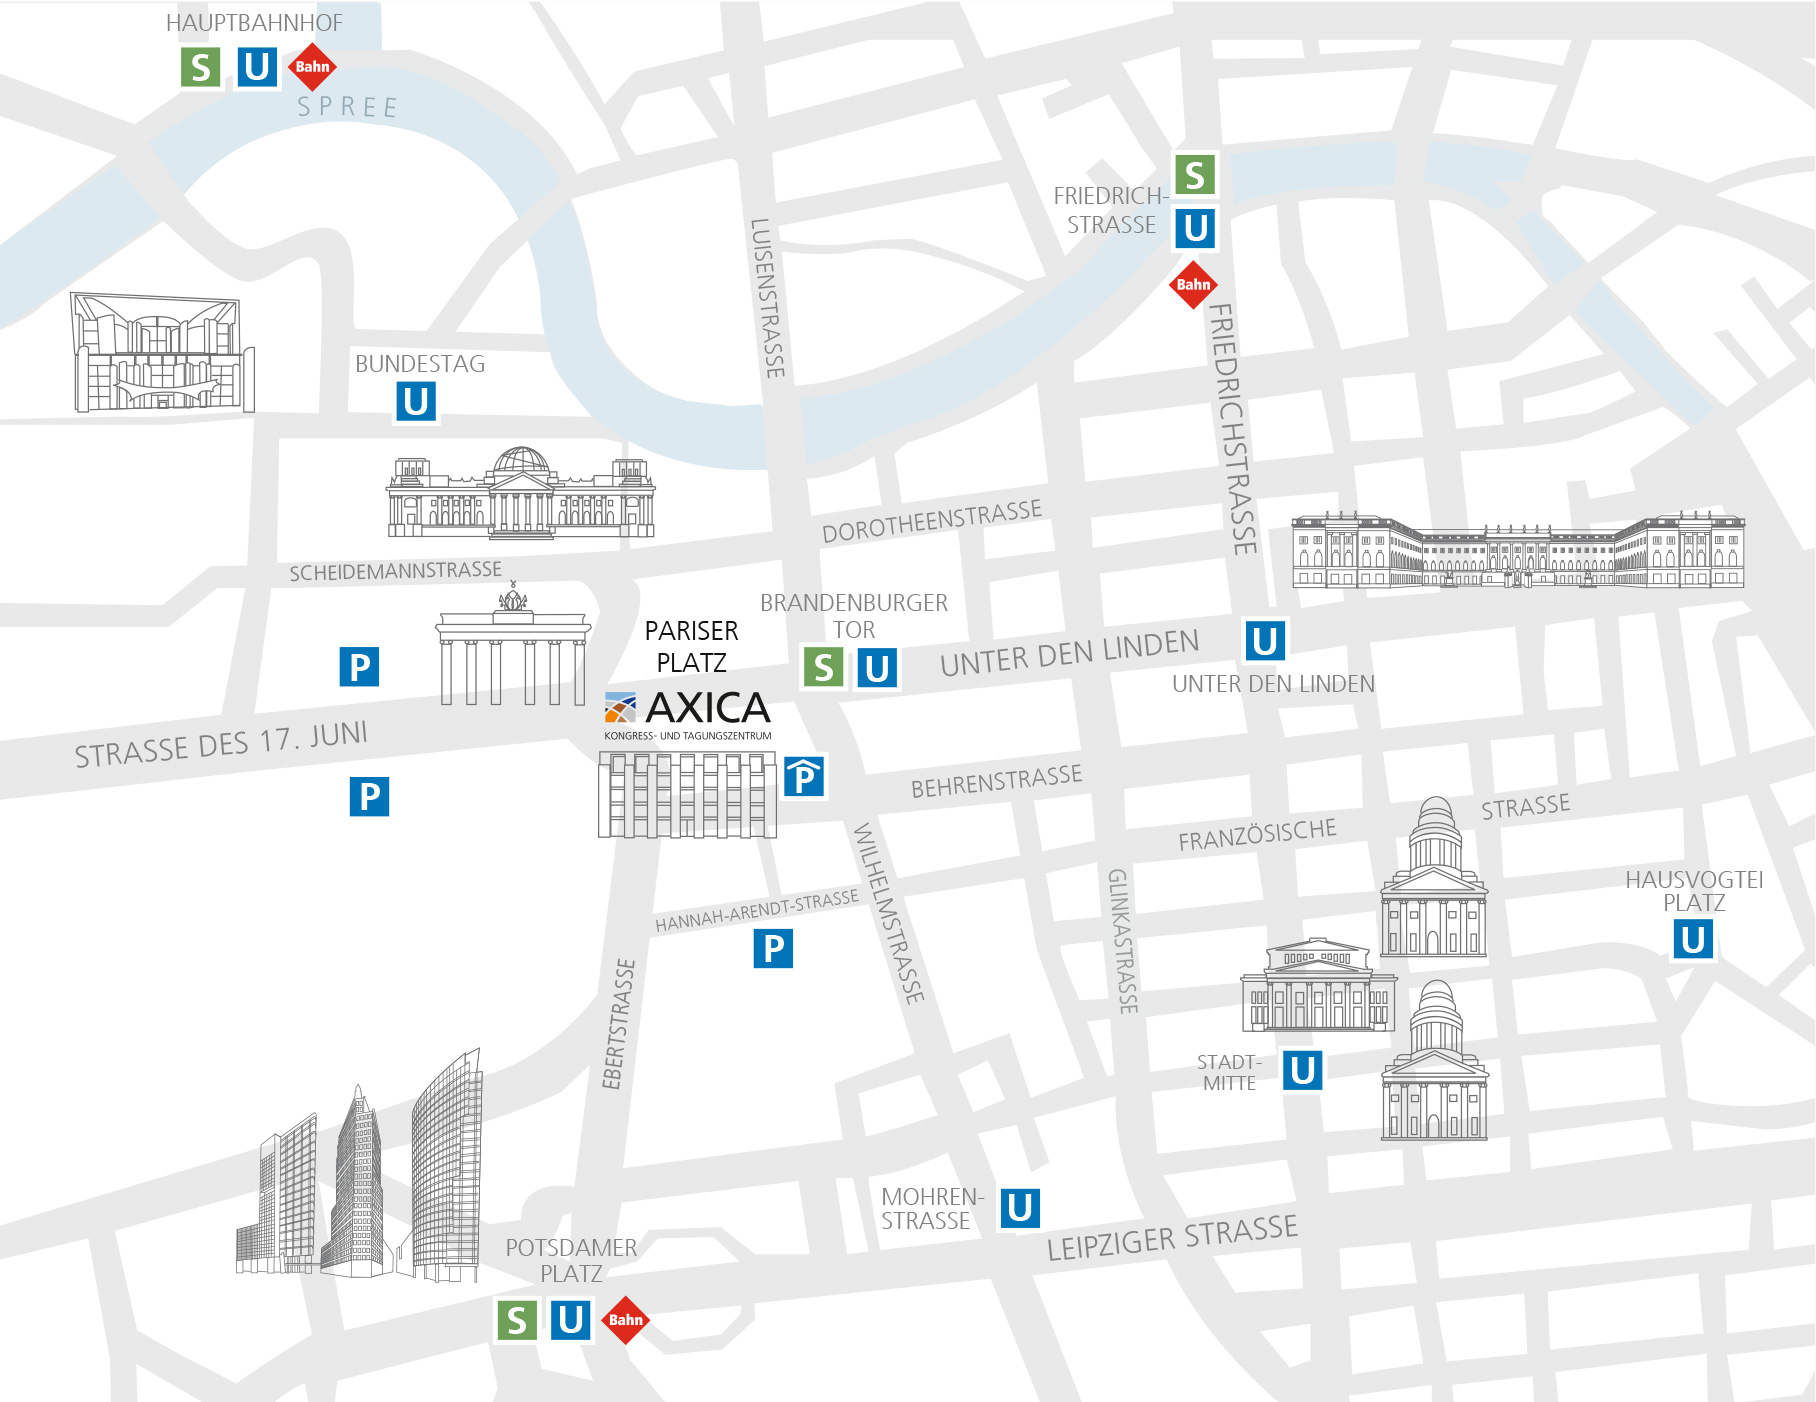 AXICA located on the map